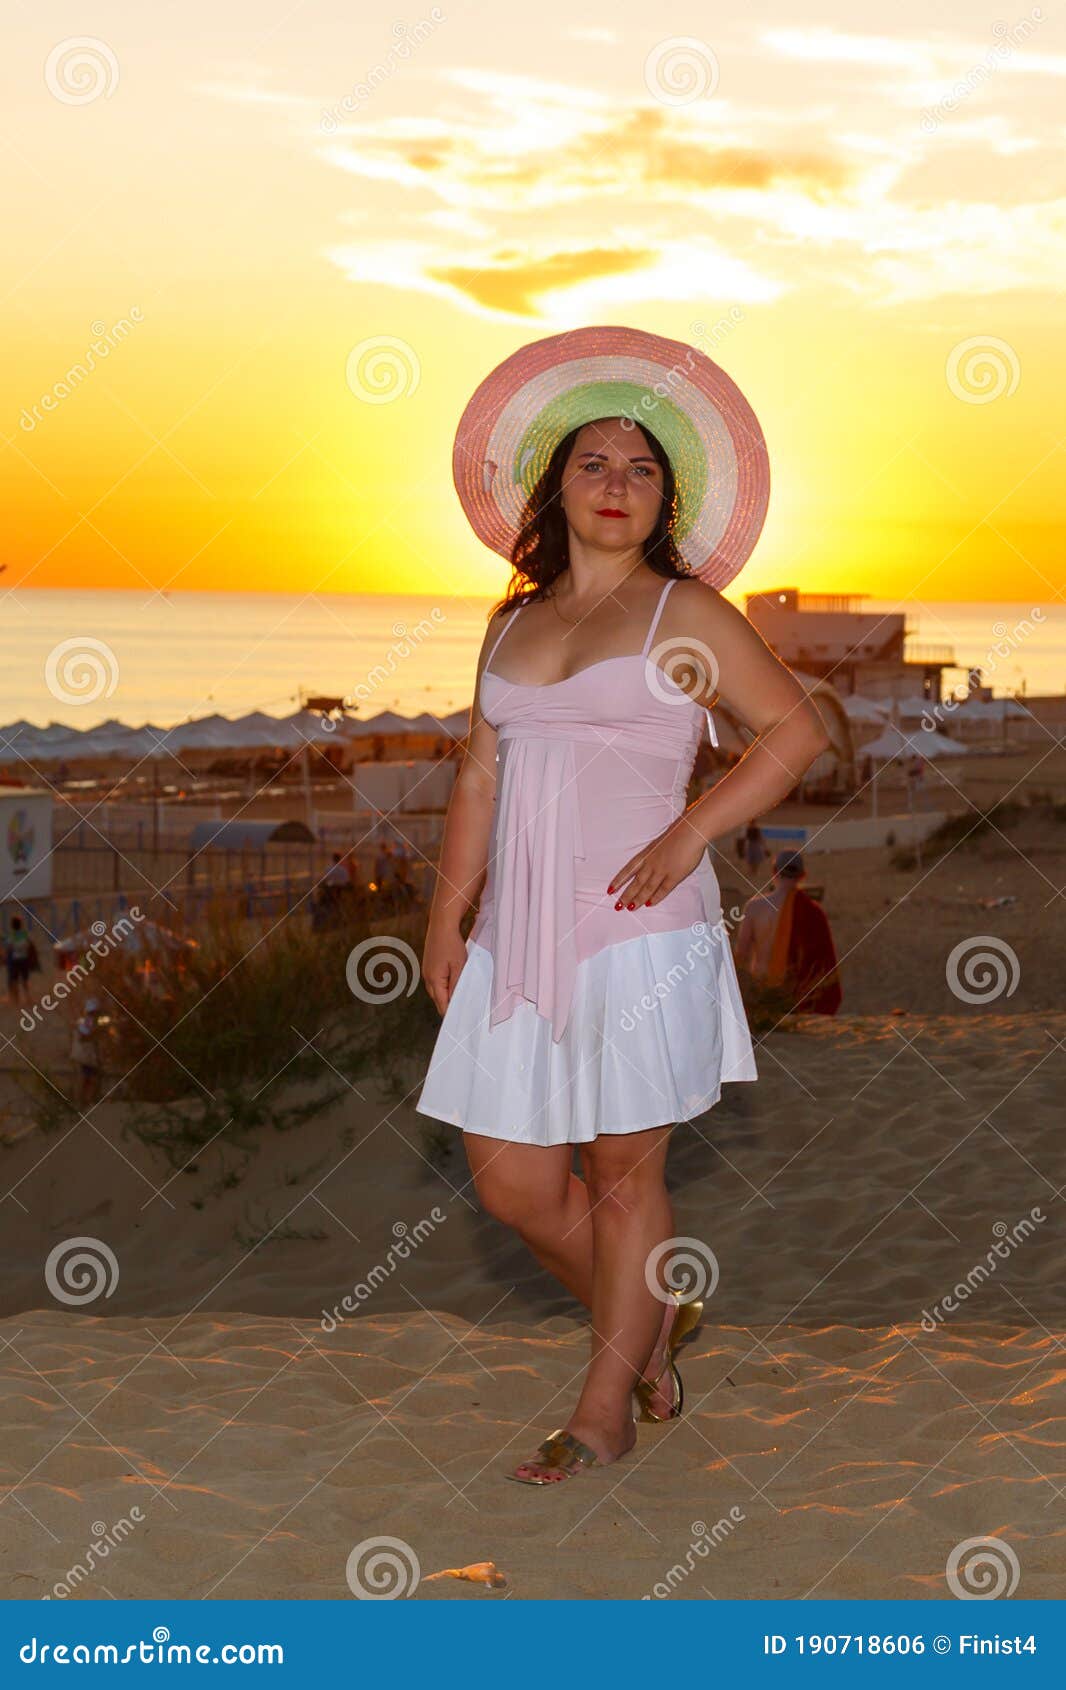 jewish woman in a hat and white dress at sunset on a background of the sea.